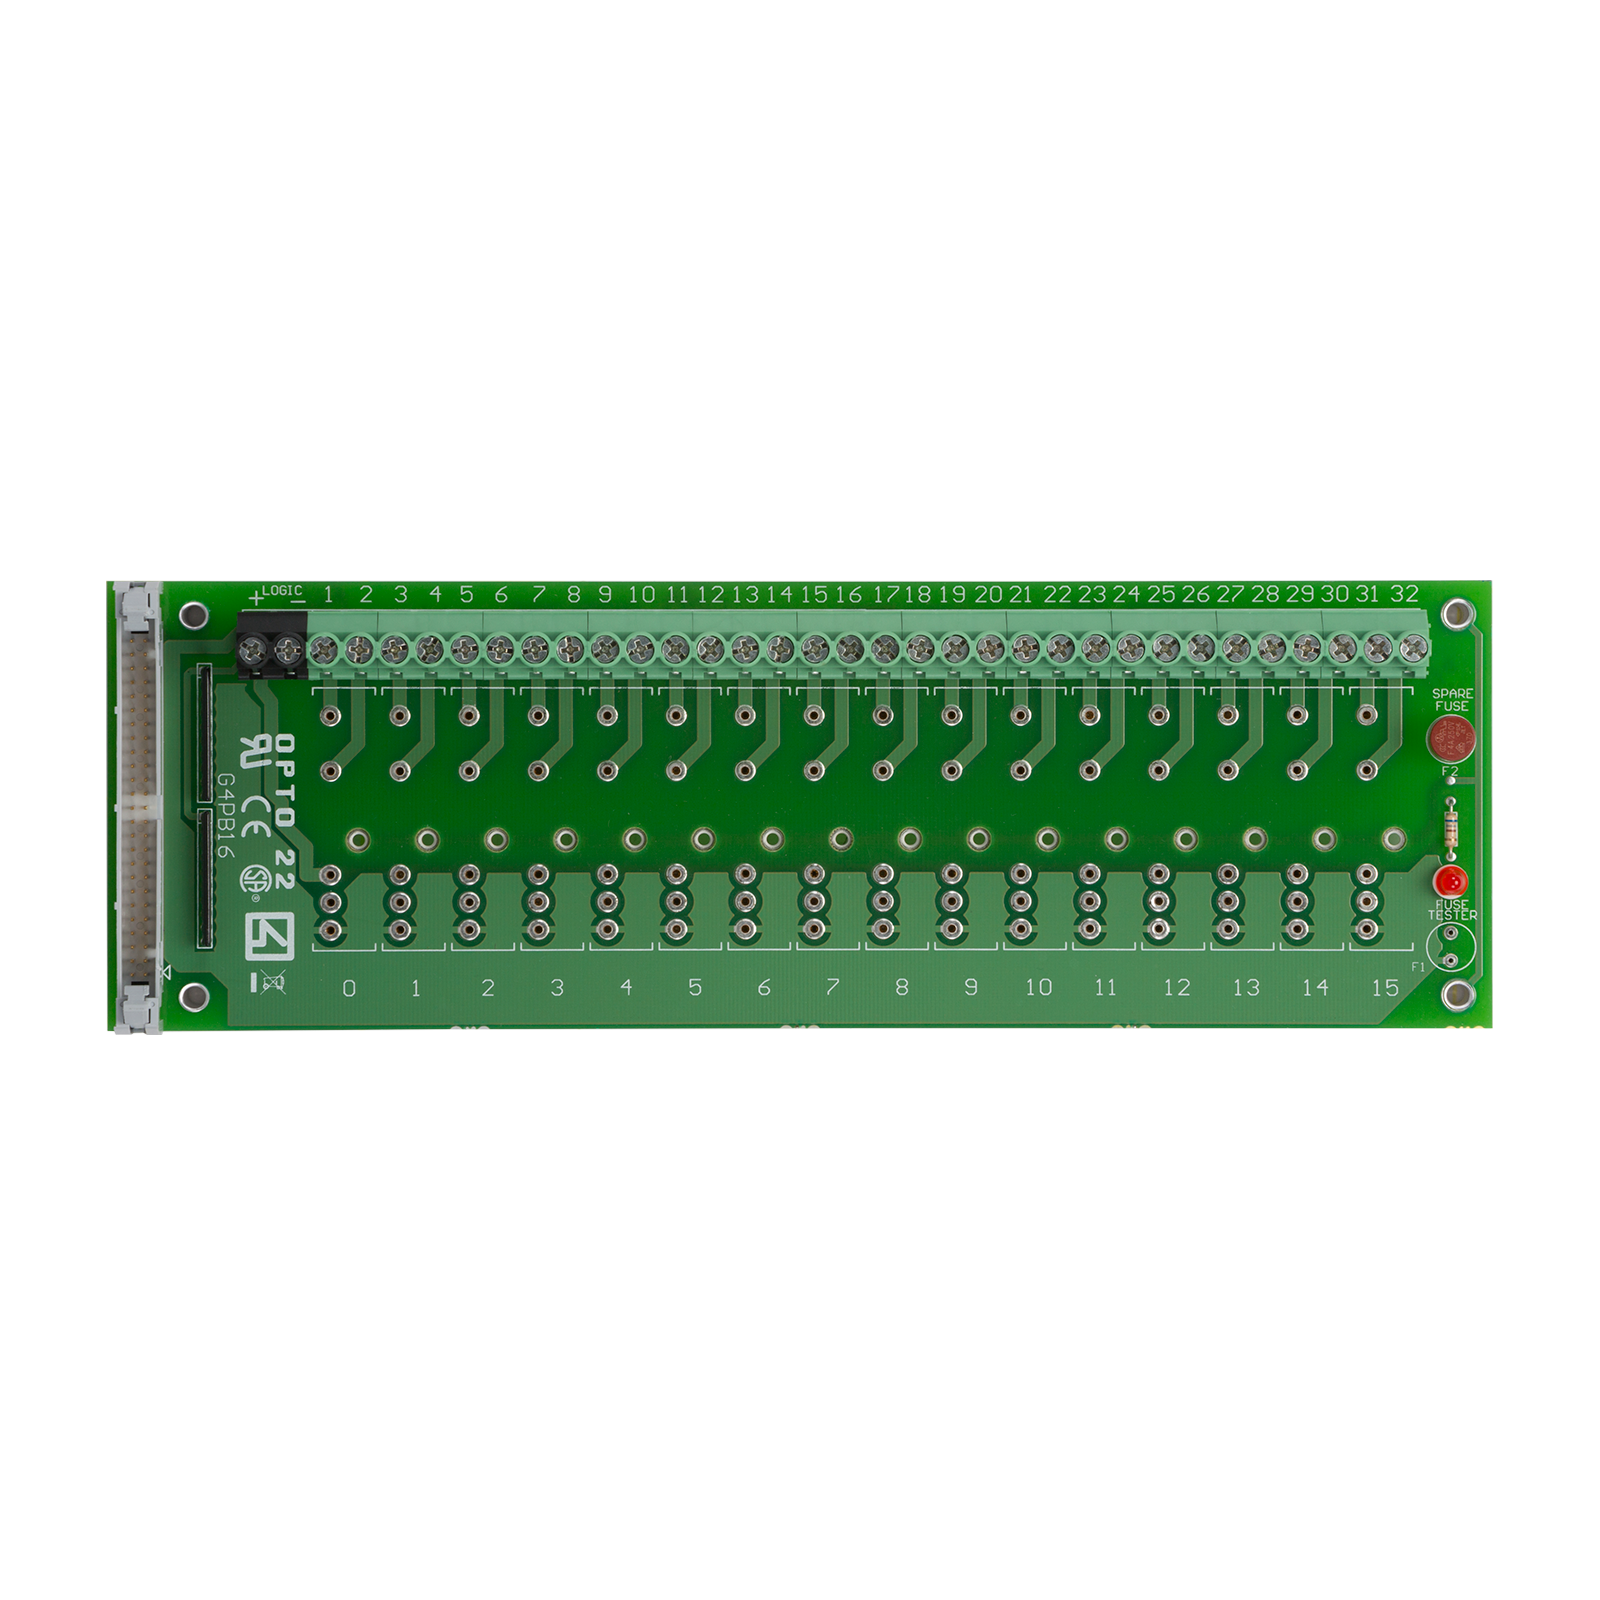 Opto 22 G4 24 Channel I/o Module Rack 50 Conductor G4PB24 for sale online 